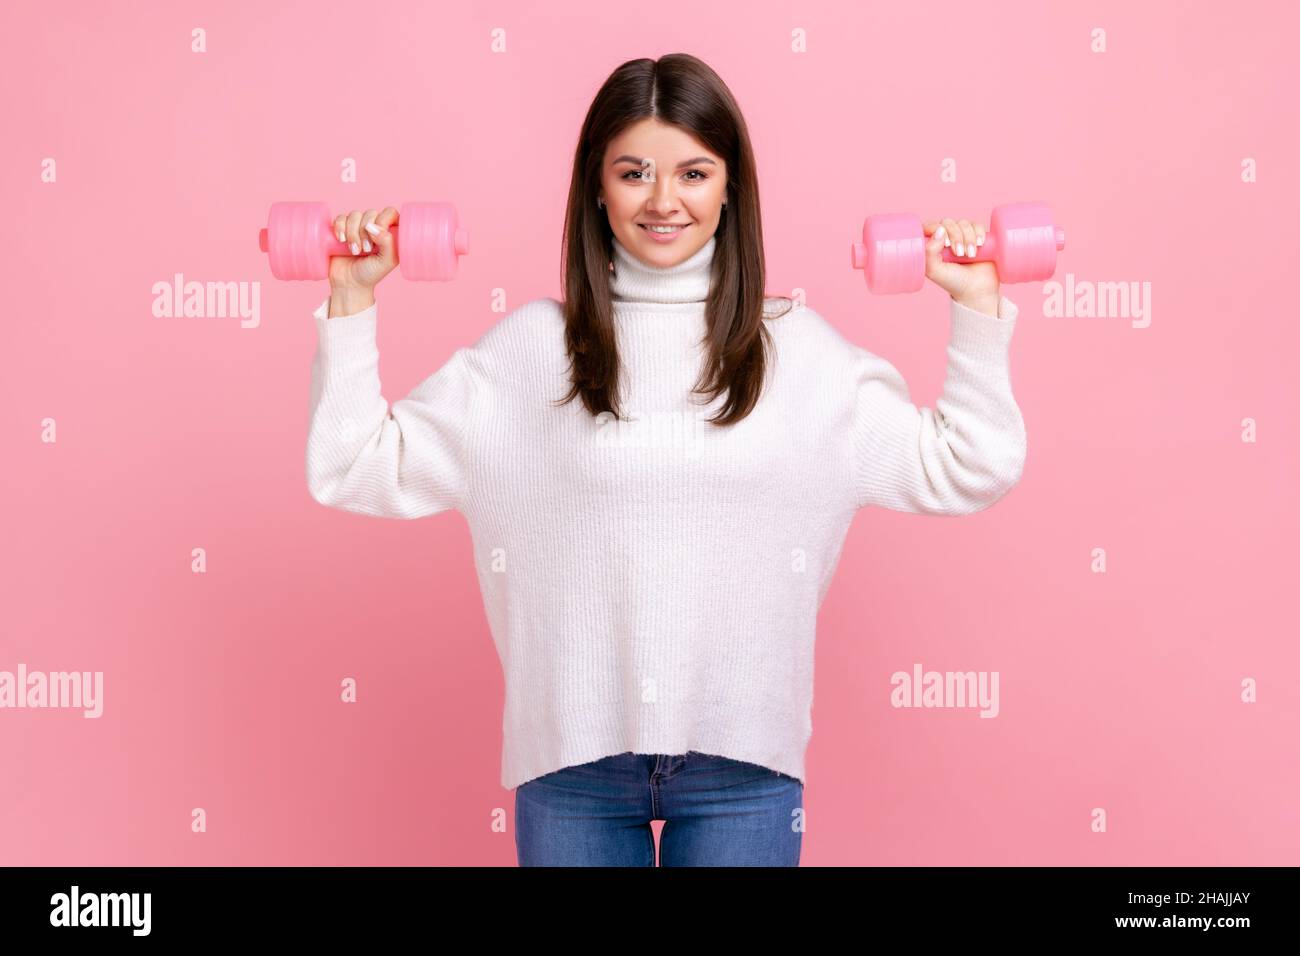 Happy smiling sportive energetic female holding rose dumbbells in raised arms, healthy lifestyle, wearing white casual style sweater. Indoor studio shot isolated on pink background. Stock Photo